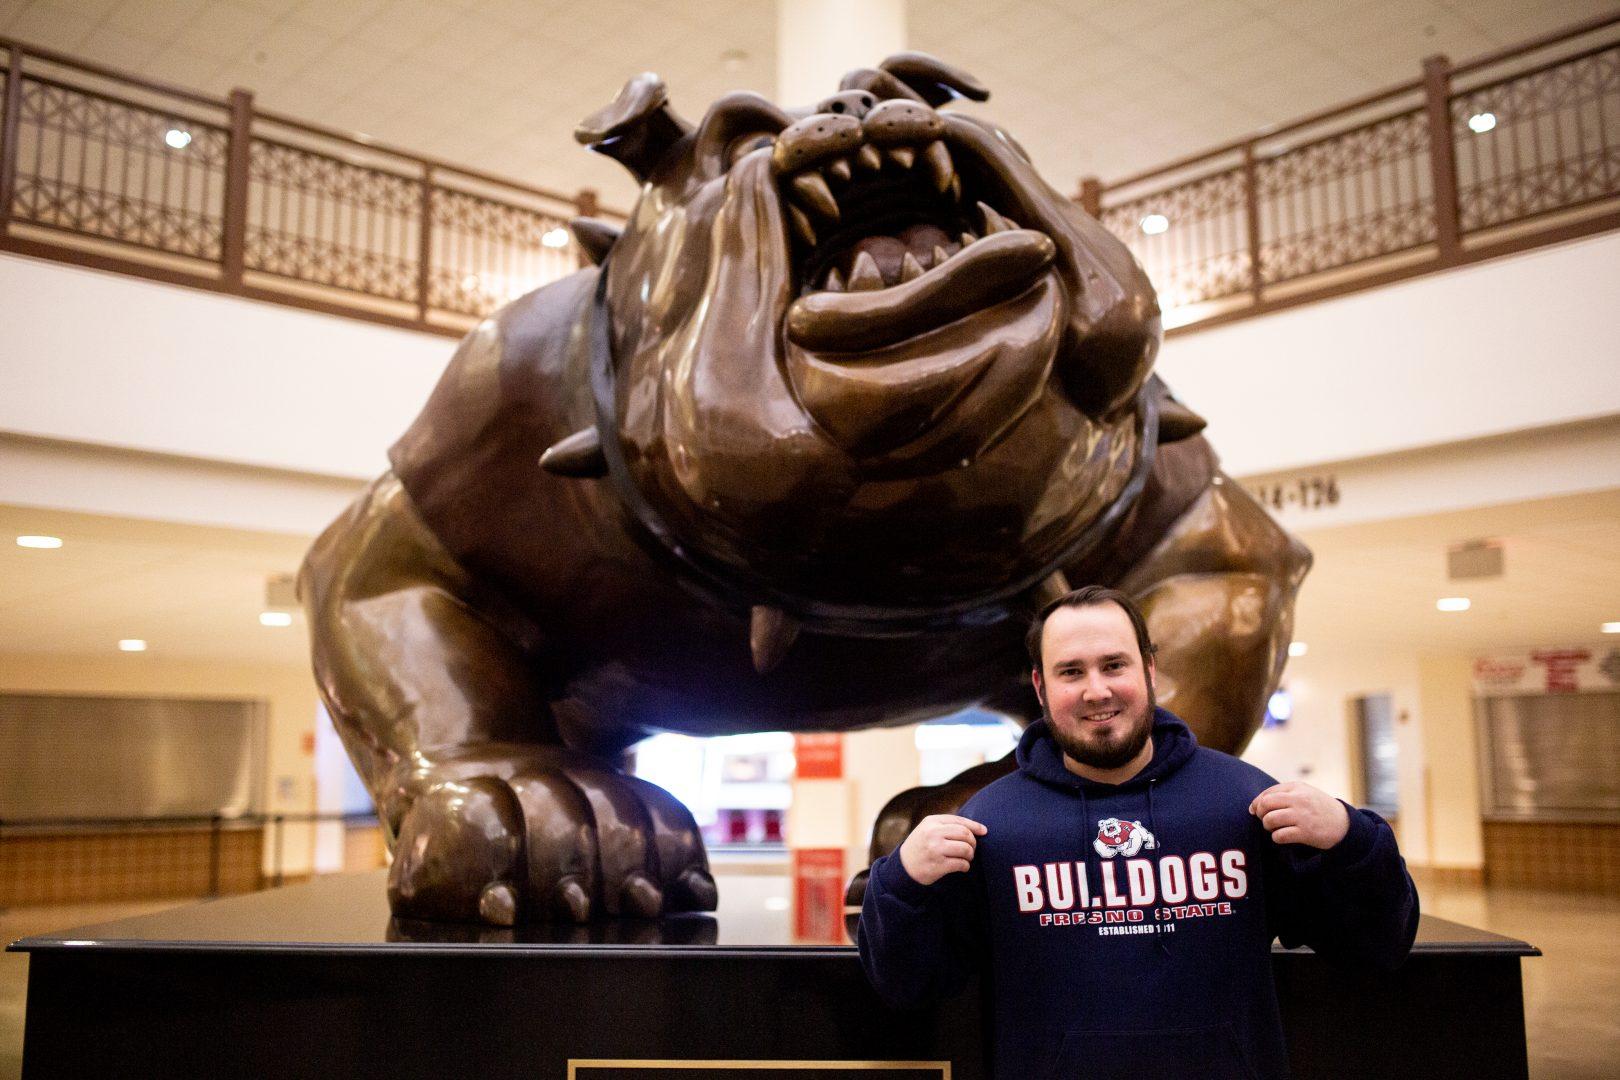 Elliot Meme, superfan, stands in front of the bronze Bulldog statue at the Save Mart Center on Tuesday, Feb. 4, 2020. (Armando Carreno/The Collegian)